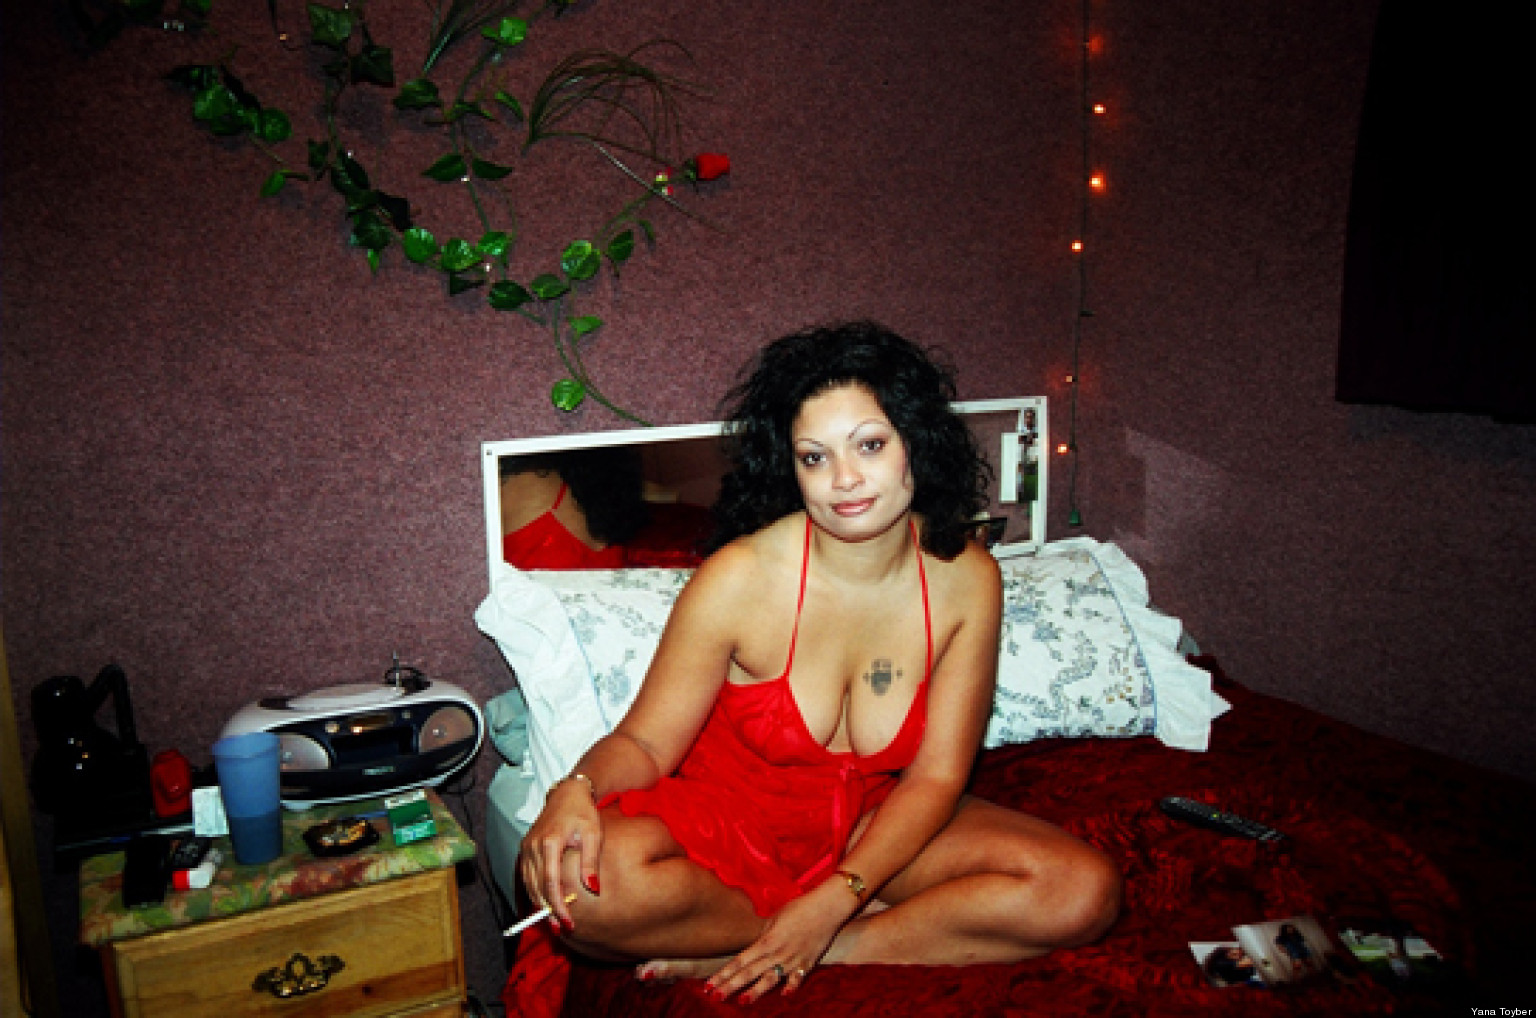 Yana Toyber Photographs Countrys Only Legal Prostitutes PHOTOS